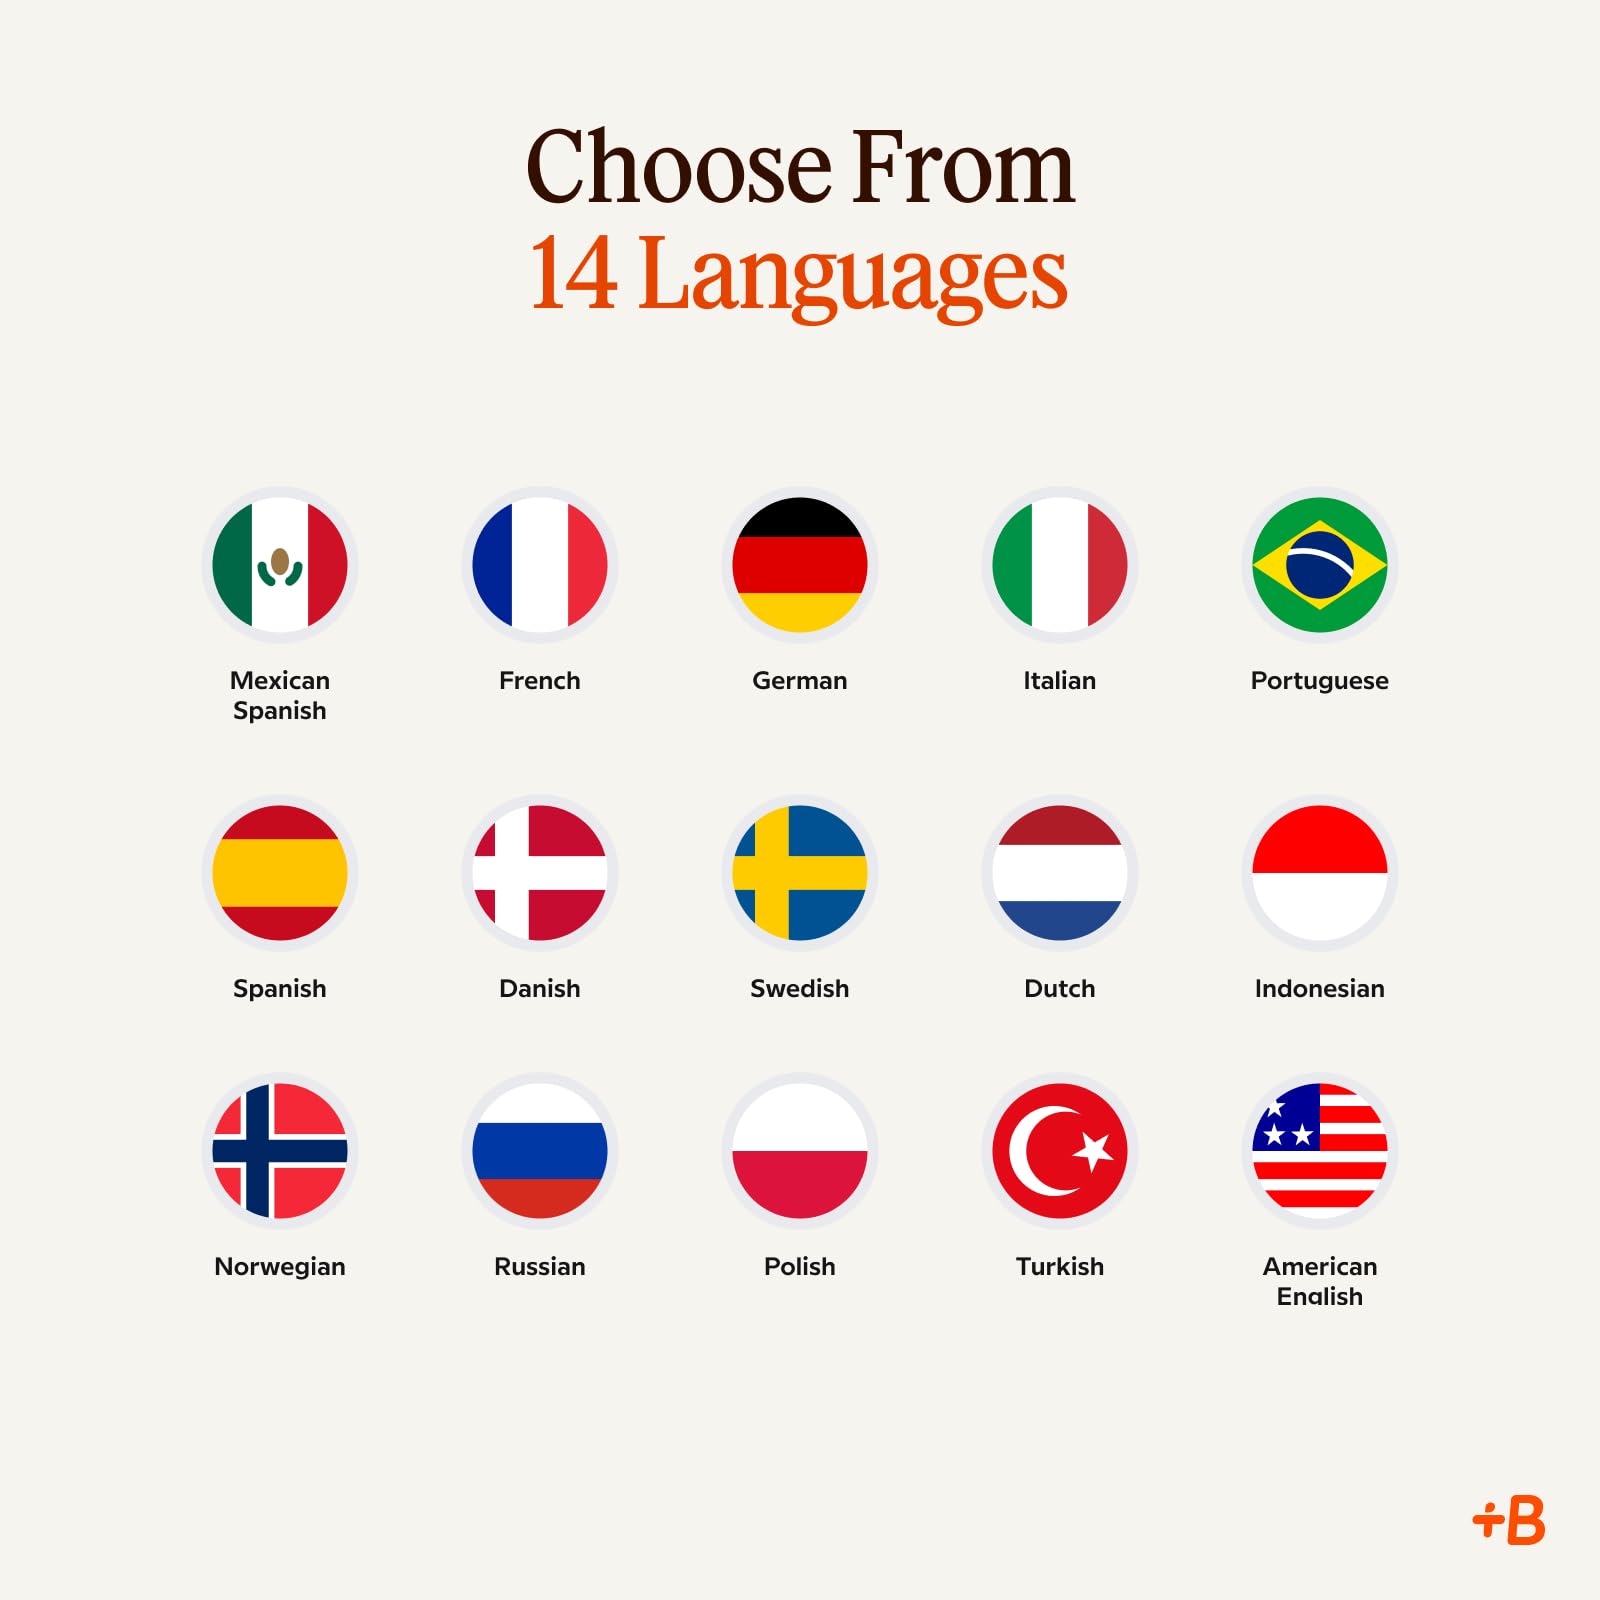 Babbel Language Learning Software - Learn to Speak Spanish, French, English, & More - All 14 Languages Included, Audio Lessons - Compatible with iOS, Android, Mac & PC (3 Month Subscription)